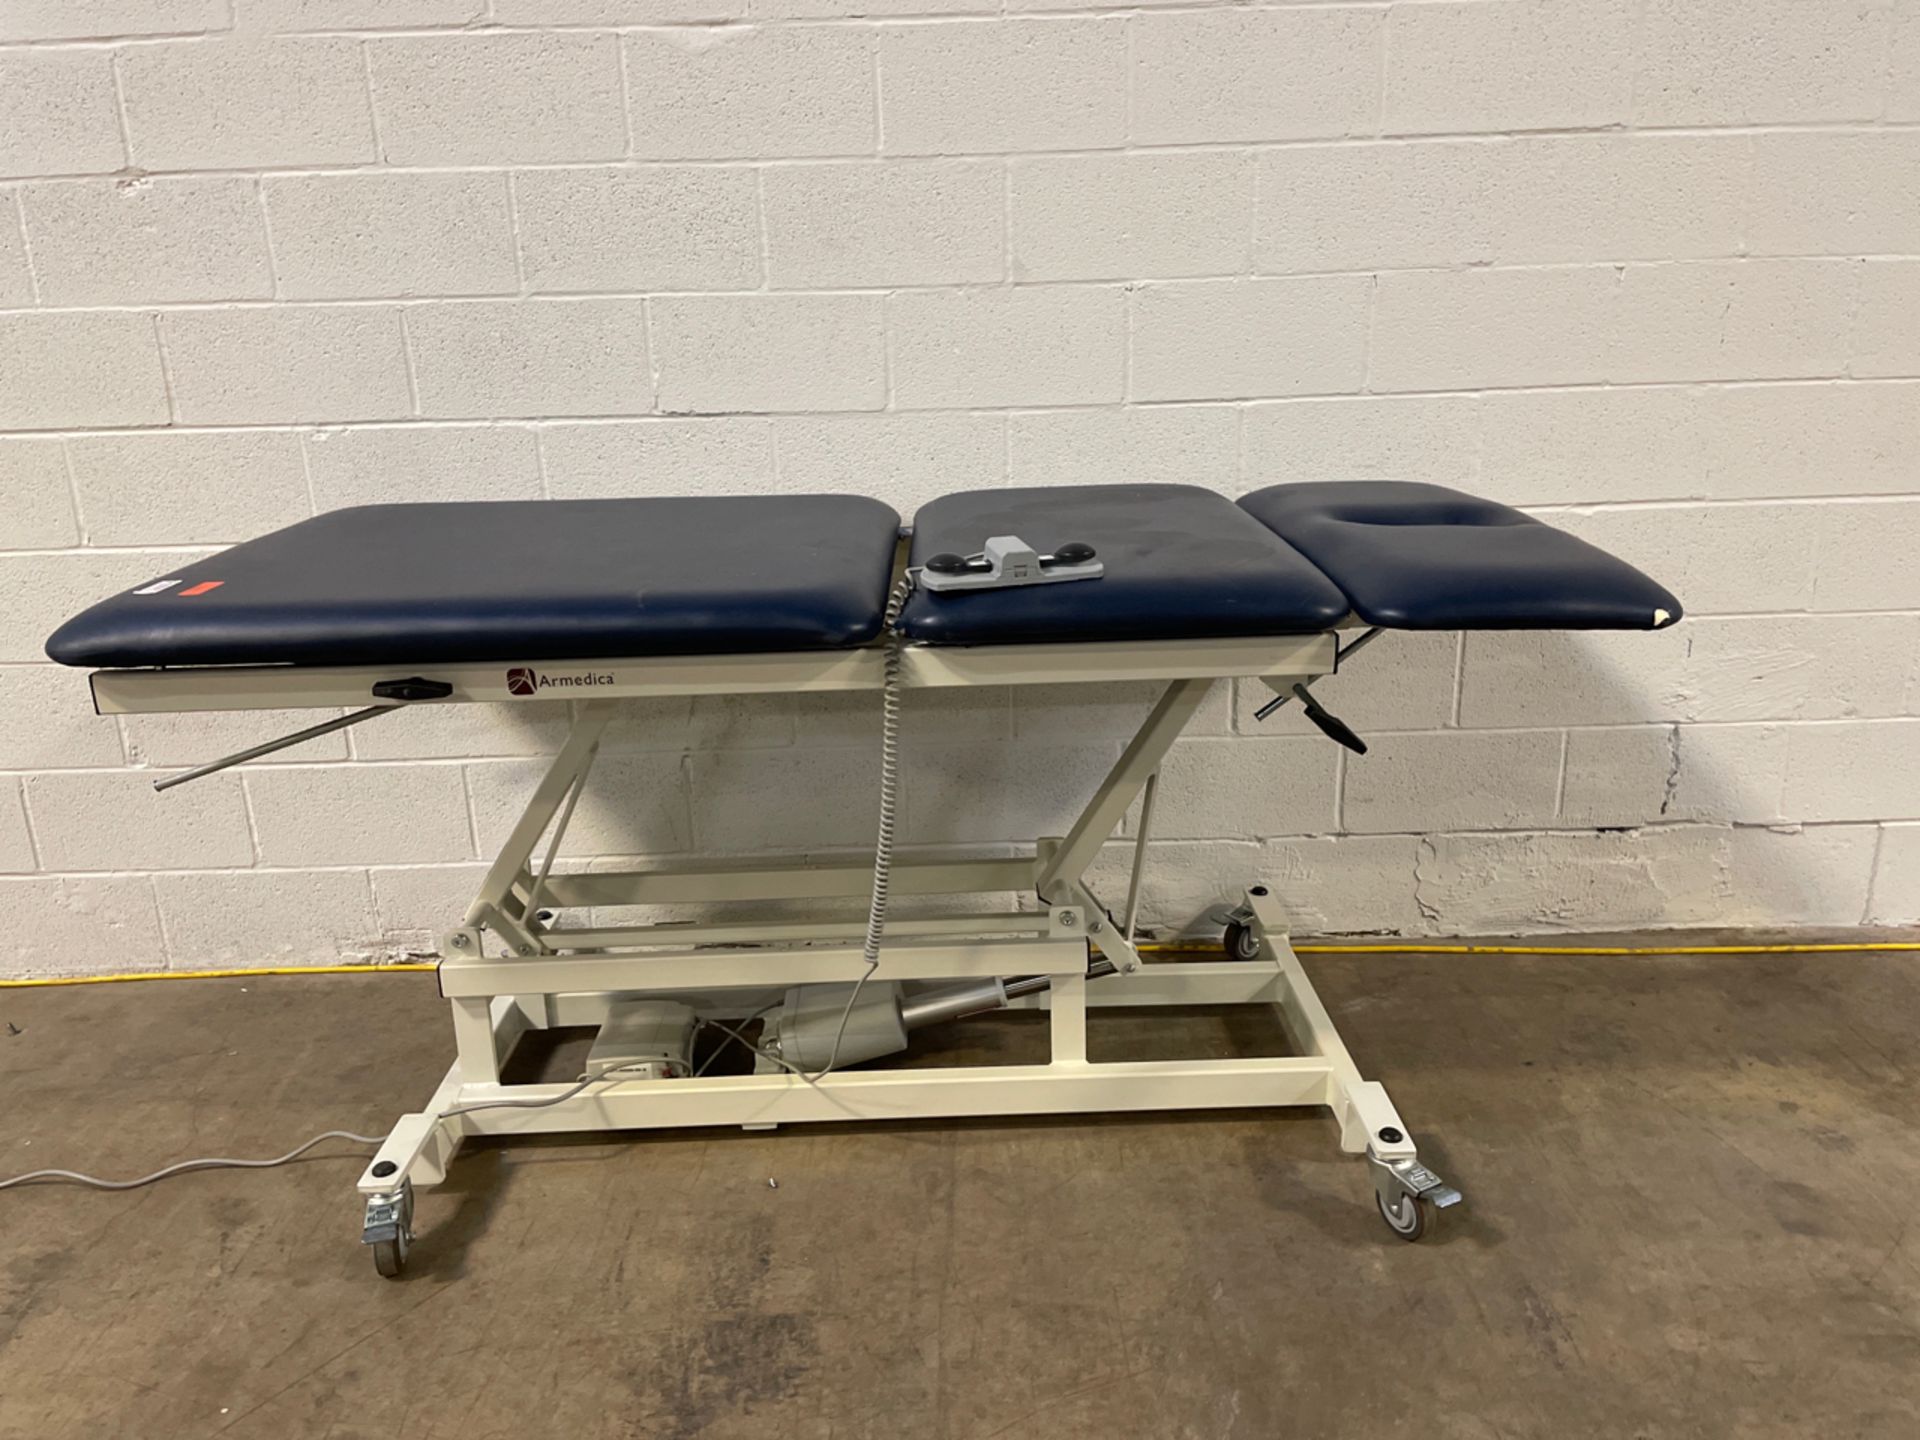 ARMEDICA PT TABLE WITH FOOTSWITCH (2019 MERIDIAN ST, ARLINGTON TX 76011)